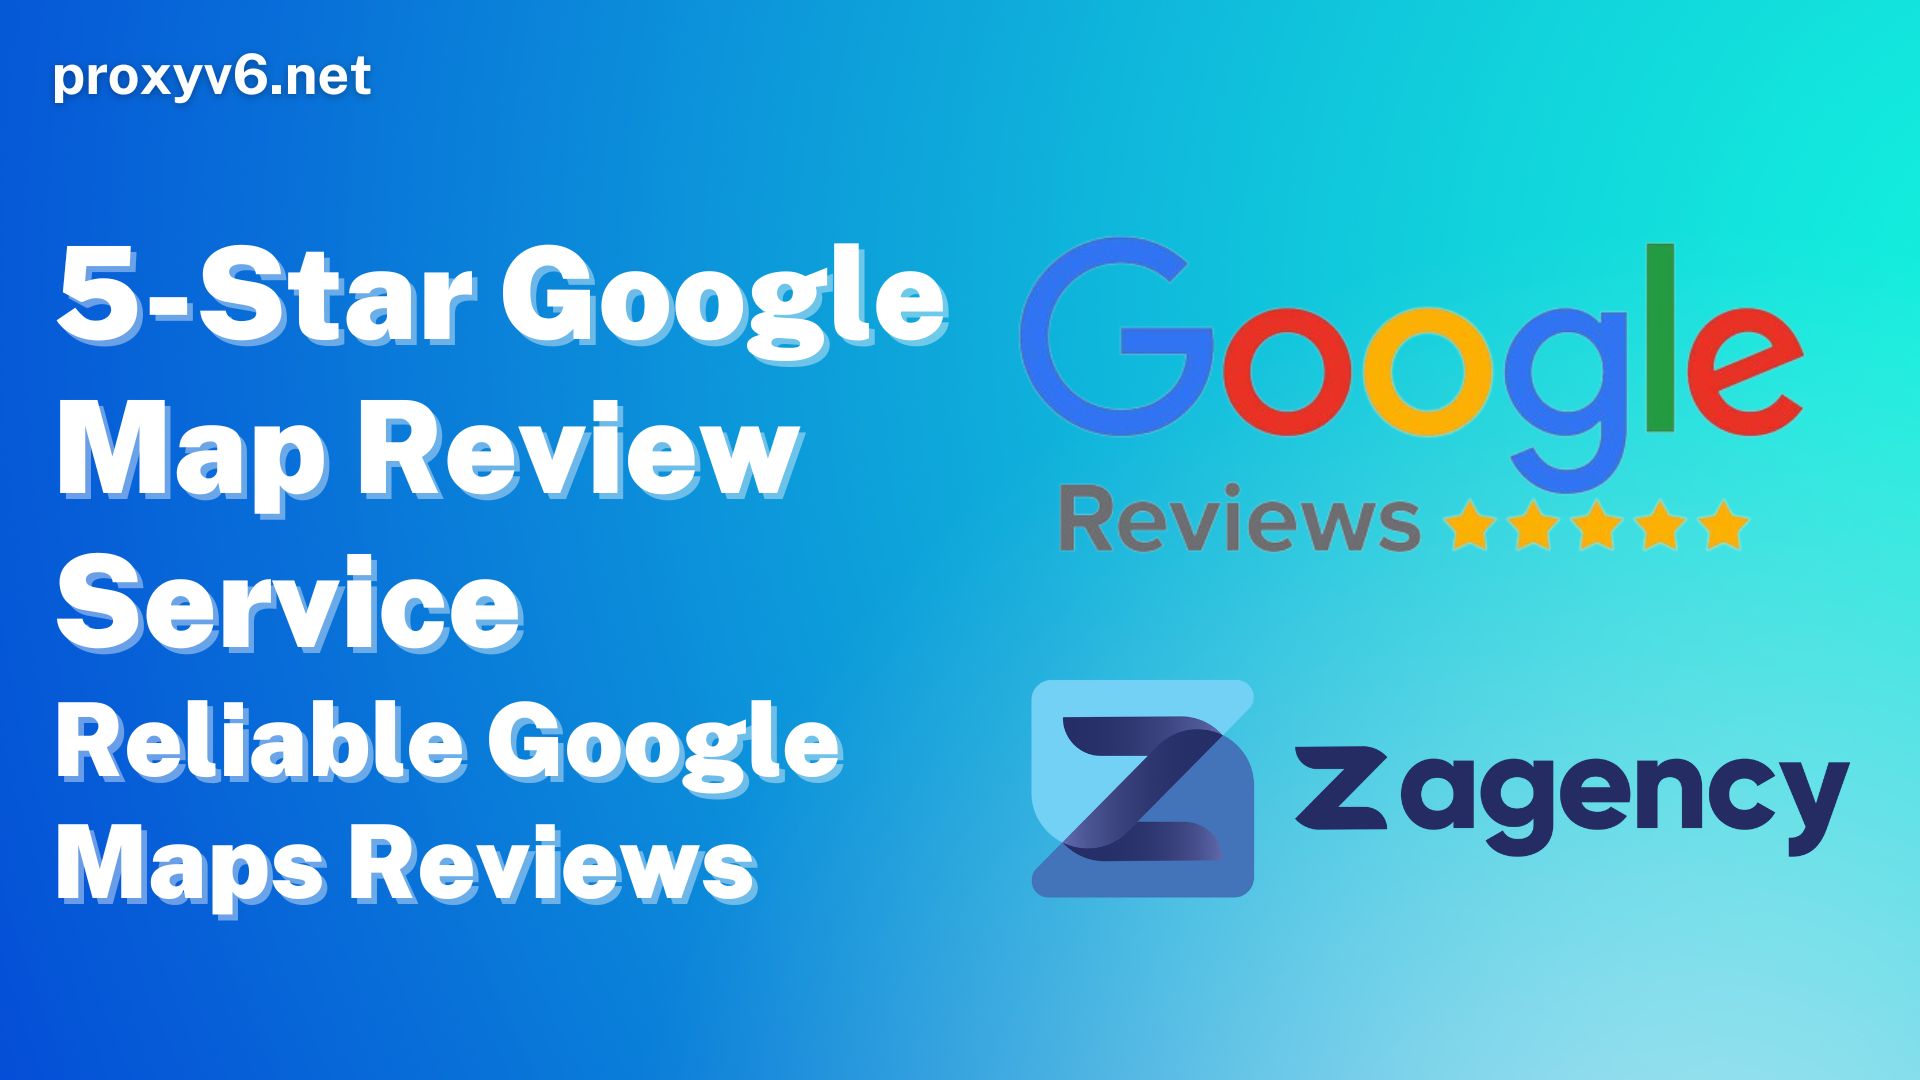 5-Star Google Map Review Service, Reliable Google Maps Reviews